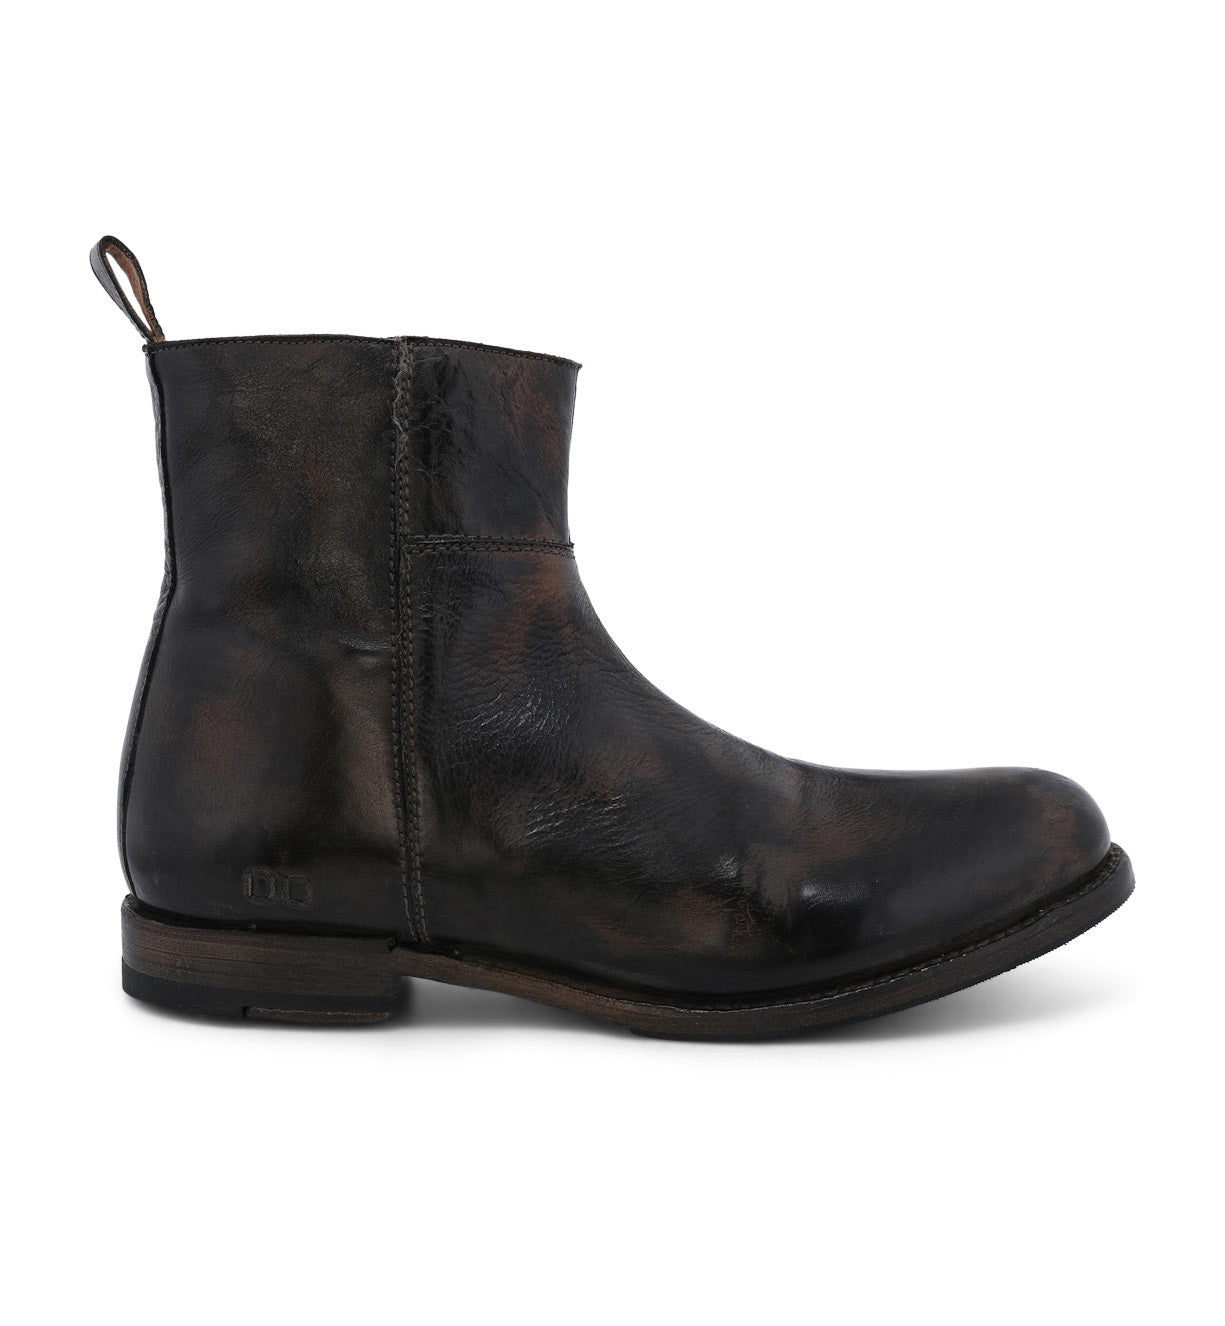 A single black leather ankle boot with a distressed finish, featuring a pull tab at the back and designed for comfort, isolated on a white background by Bed Stu's Kaldi.